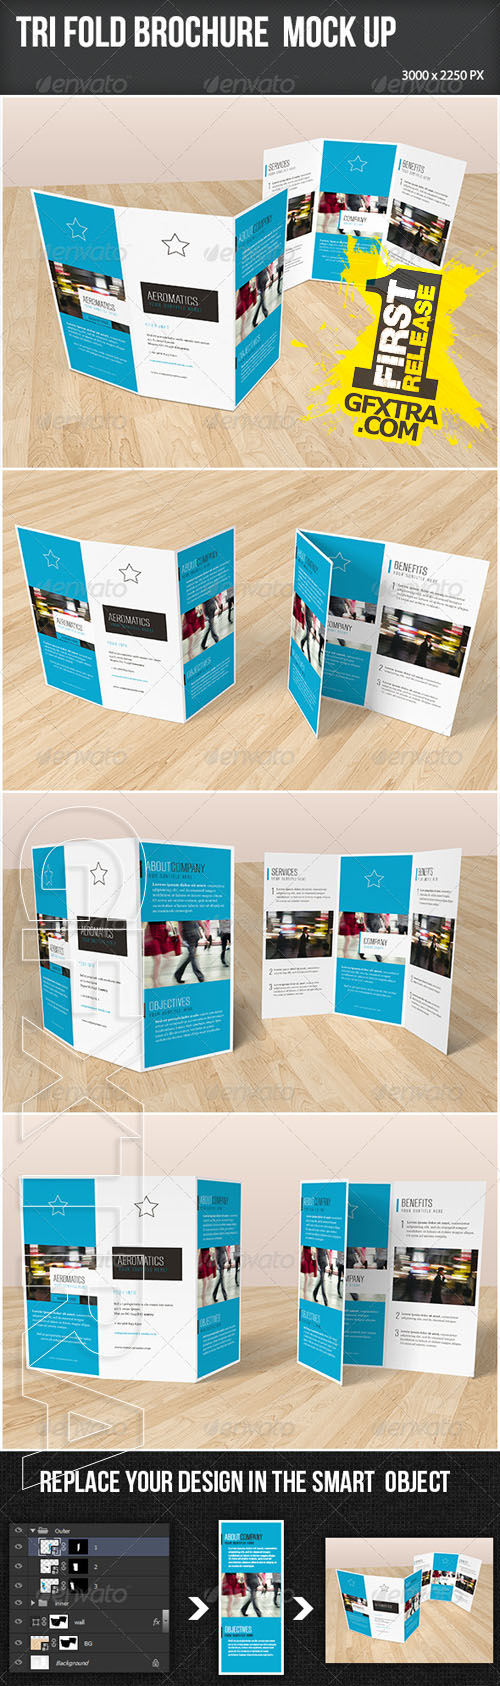 GraphicRiver - Trifold Brochure Mock-up 7201822